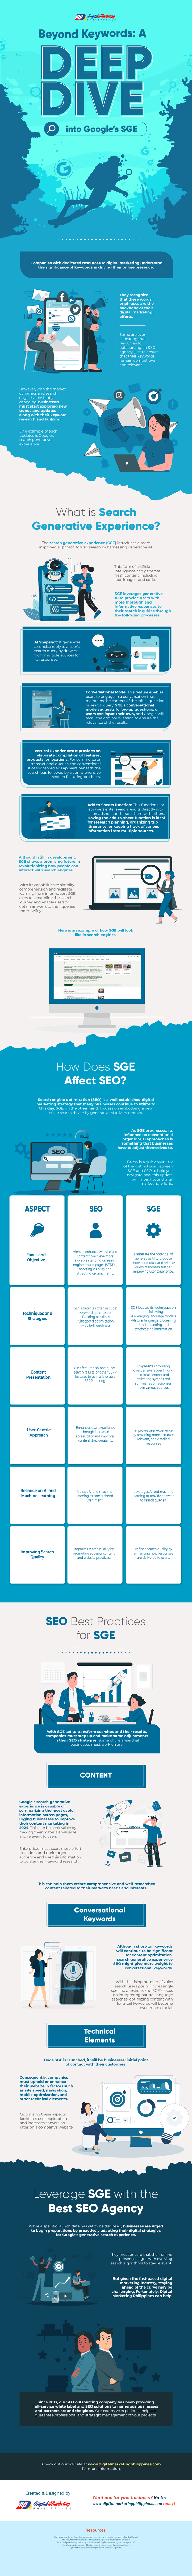 Beyond Keywords: A Deep Dive into Google's SGE infographic